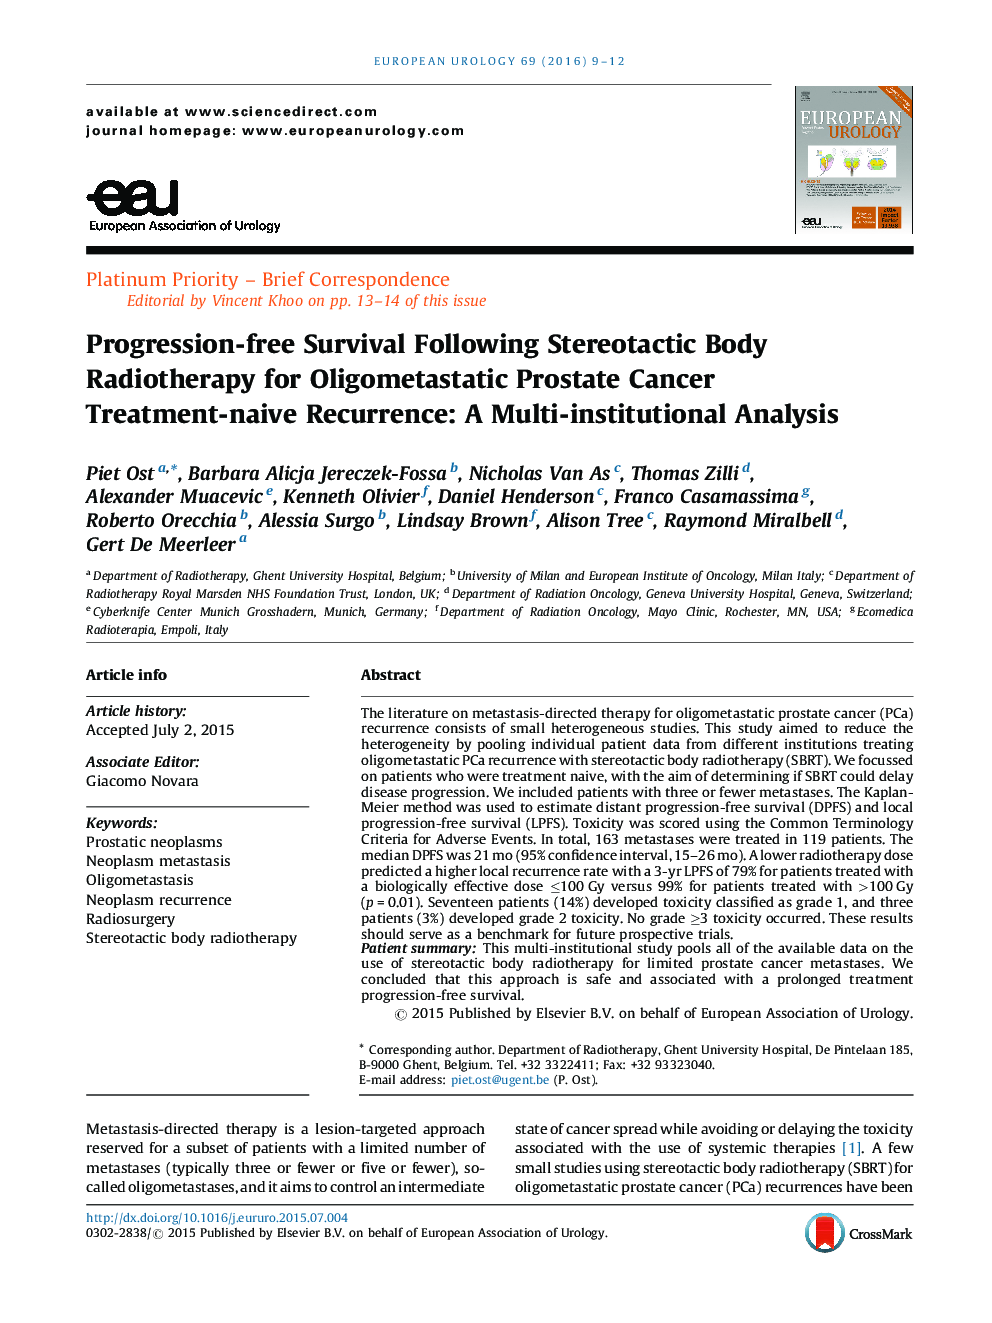 Progression-free Survival Following Stereotactic Body Radiotherapy for Oligometastatic Prostate Cancer Treatment-naive Recurrence: A Multi-institutional Analysis